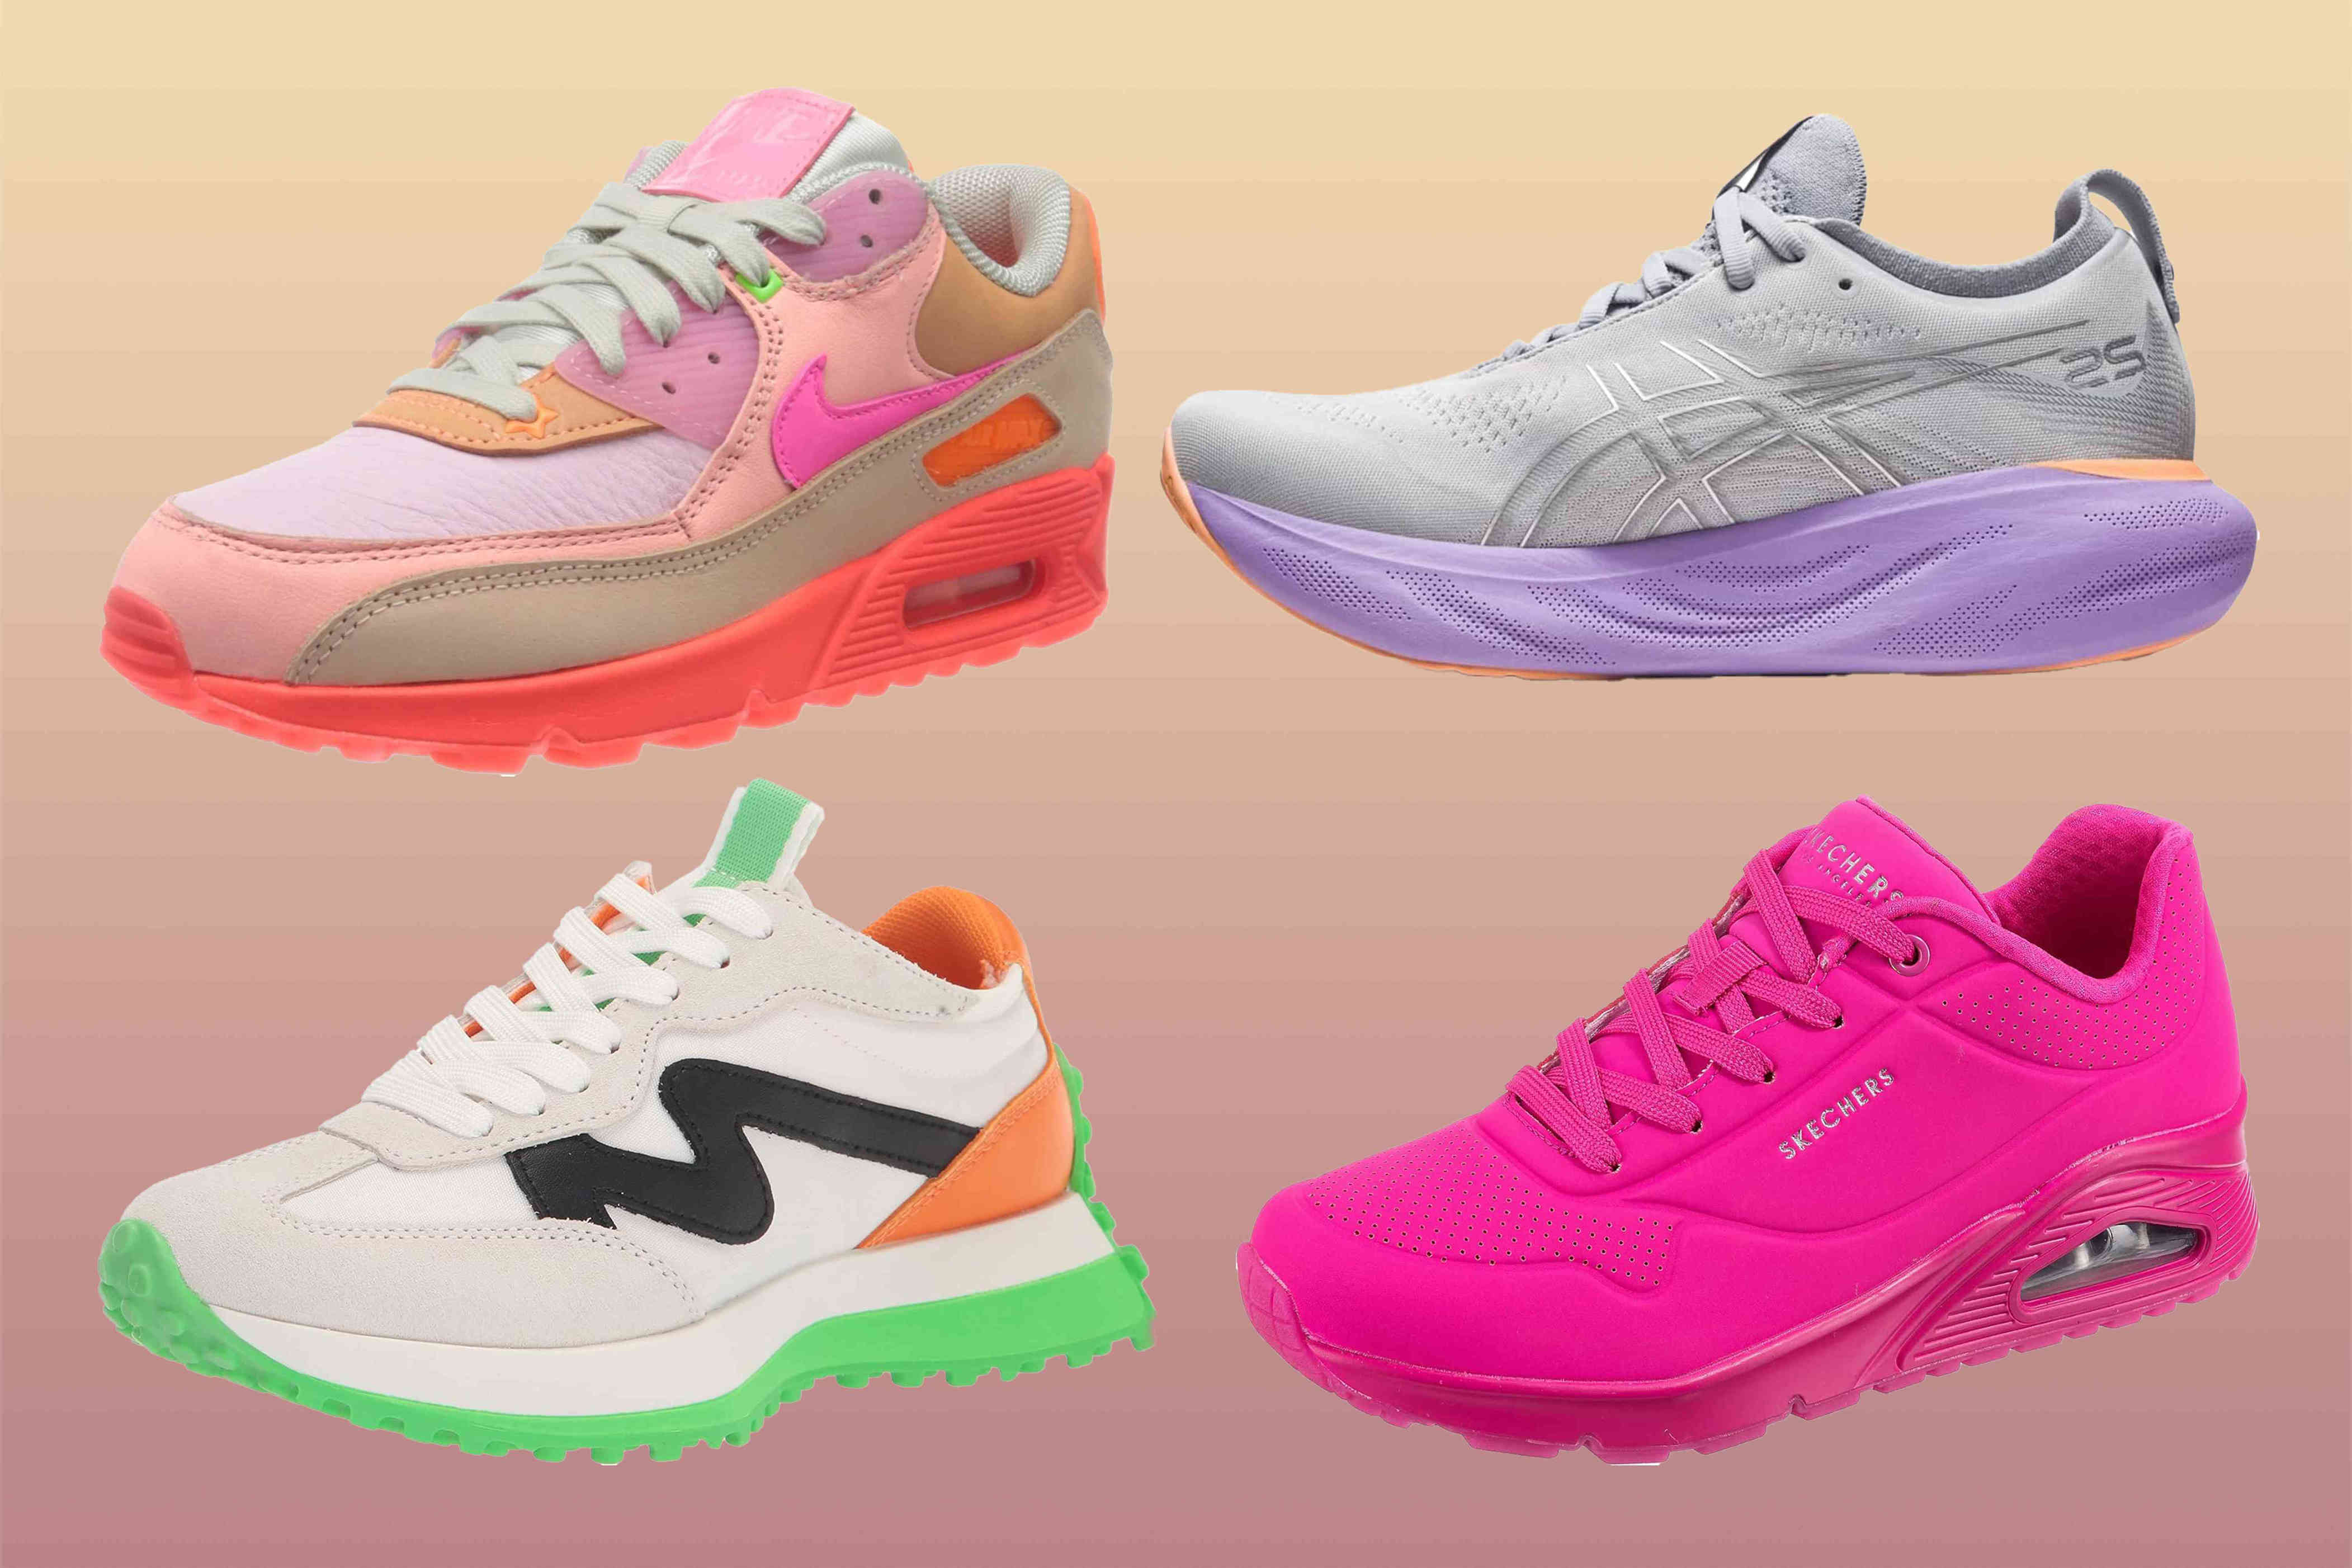 amazon, travelers are ditching their white sneakers for these 13 colorful pairs that provide all-day comfort